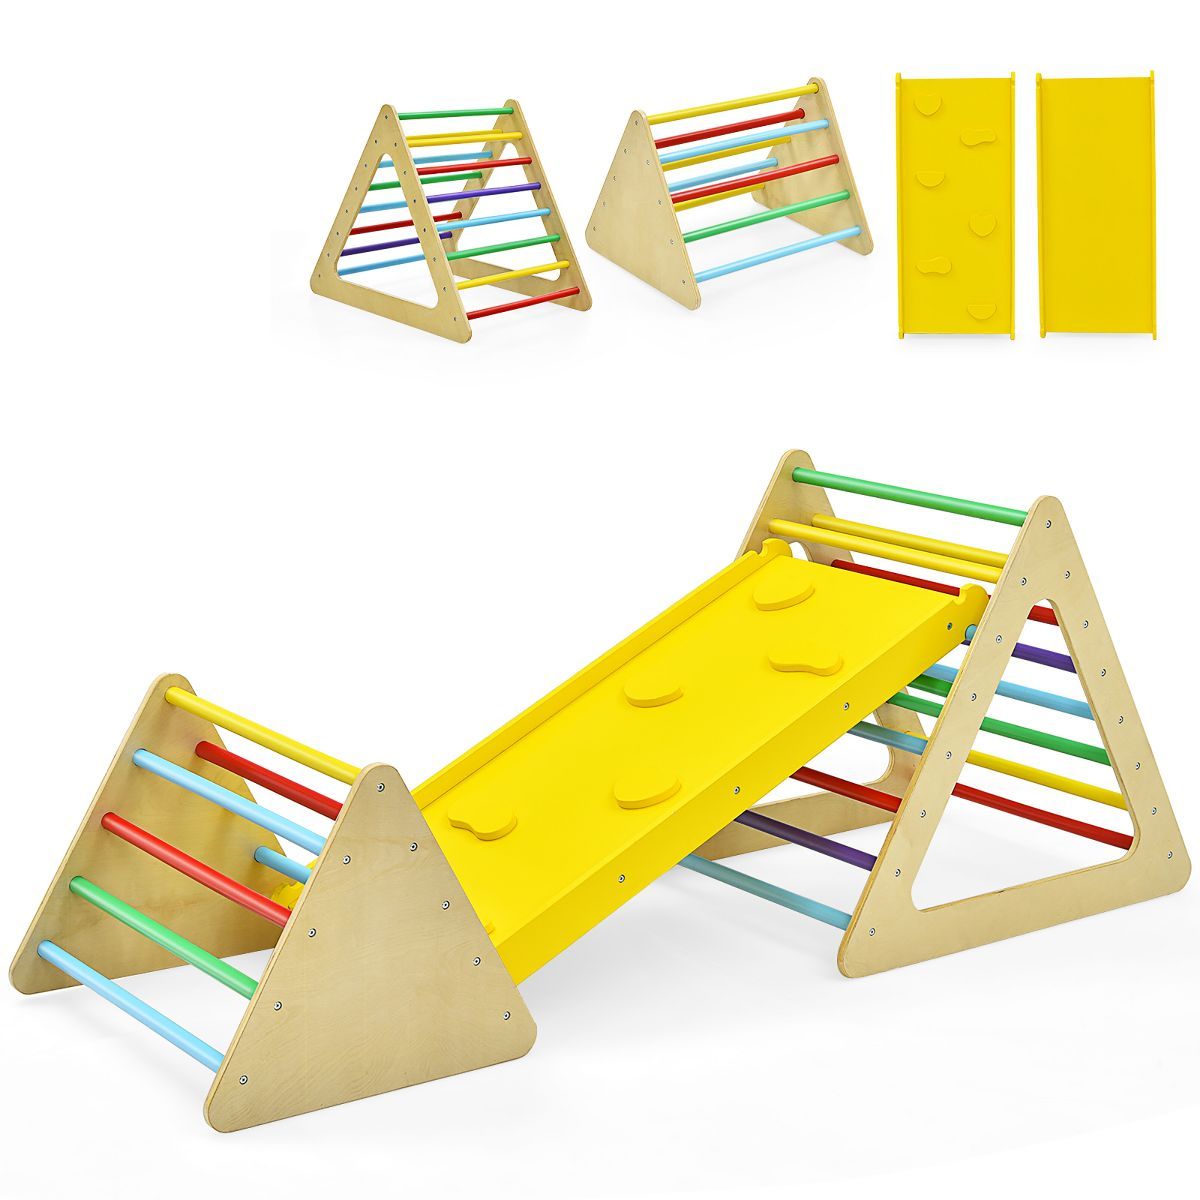 Costway 3 in 1 Kids Climbing Ladder Set 2 Triangle Climbers w/Ramp for Sliding & Climbing | Target